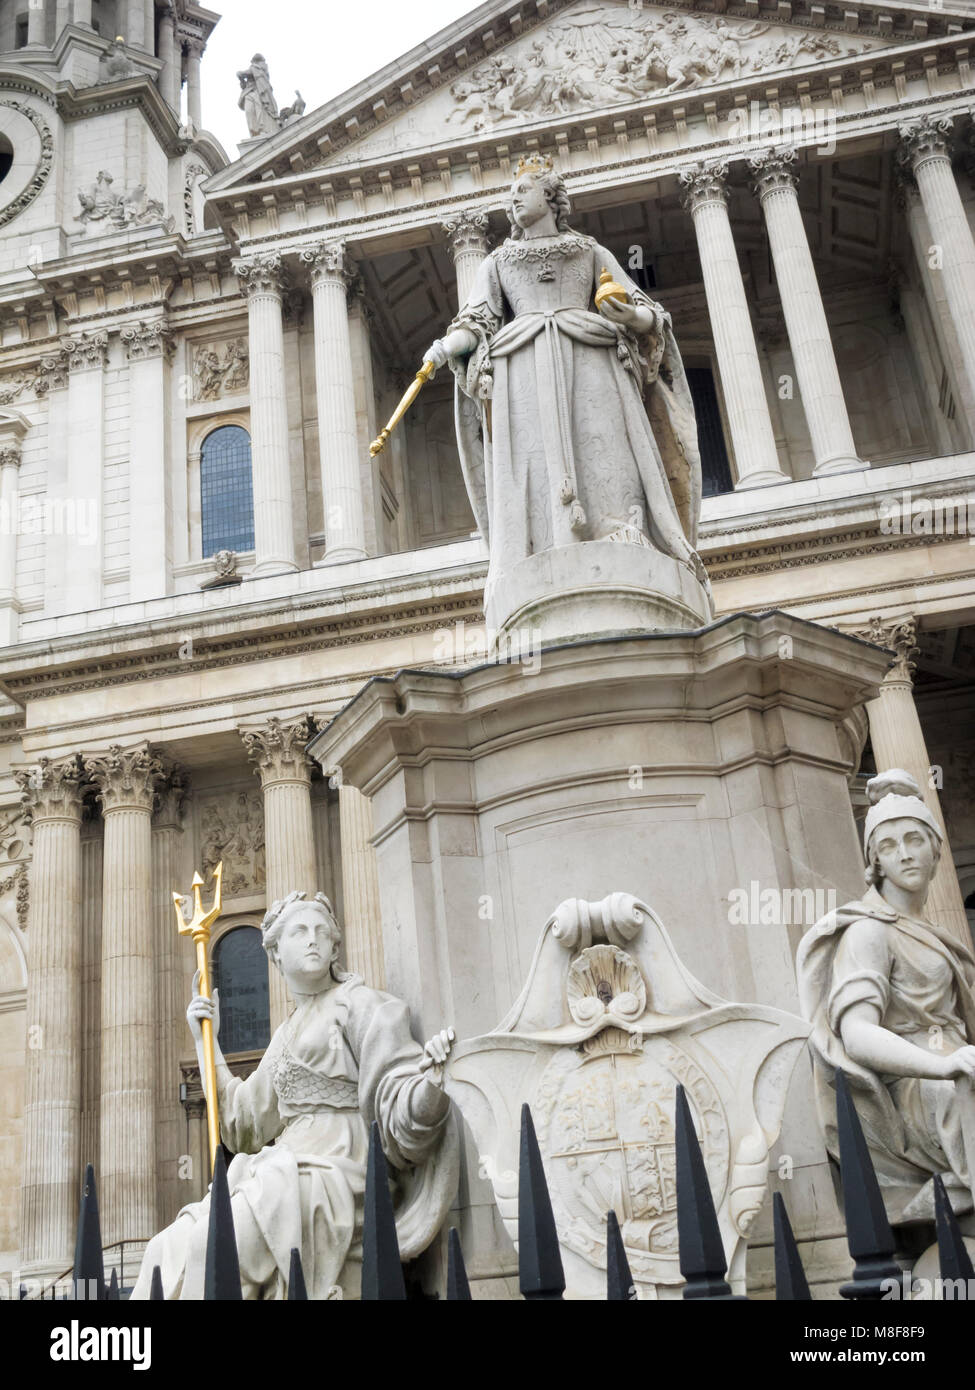 Statue of Queen Anne outside St Paul's Cathedral Ludgate Hill London England Stock Photo